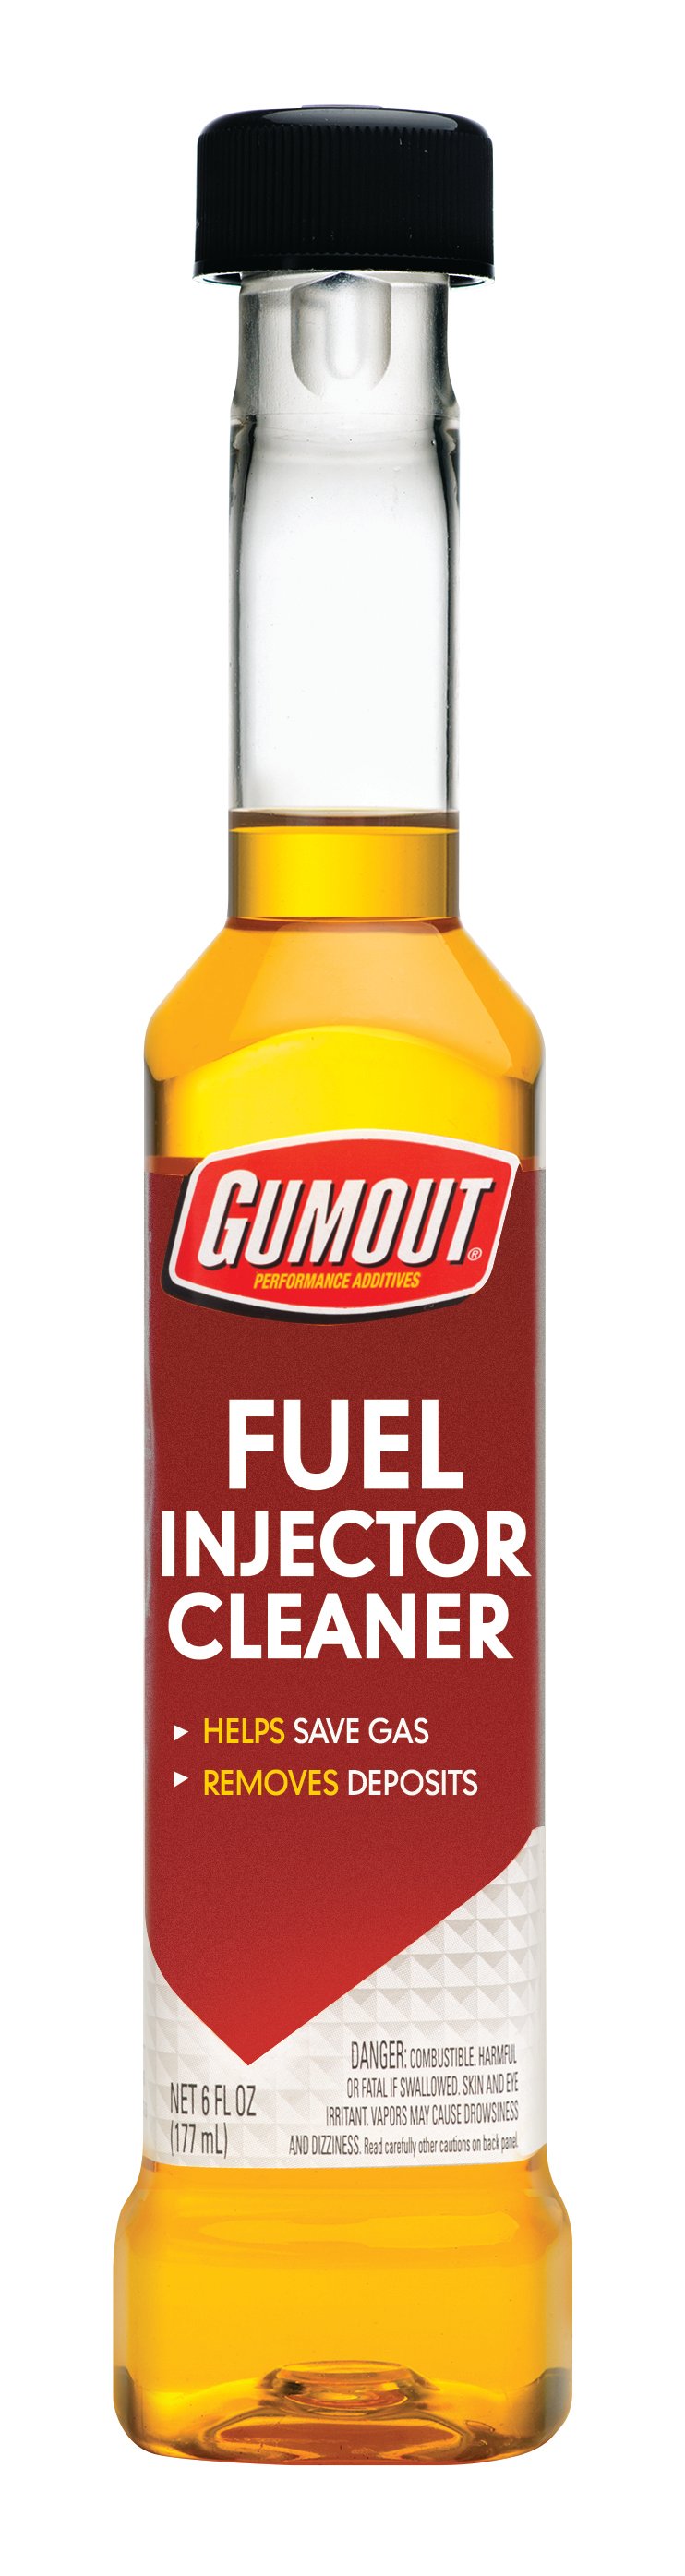 Gumout Fuel Injector Cleaner, 6 oz. - 510019